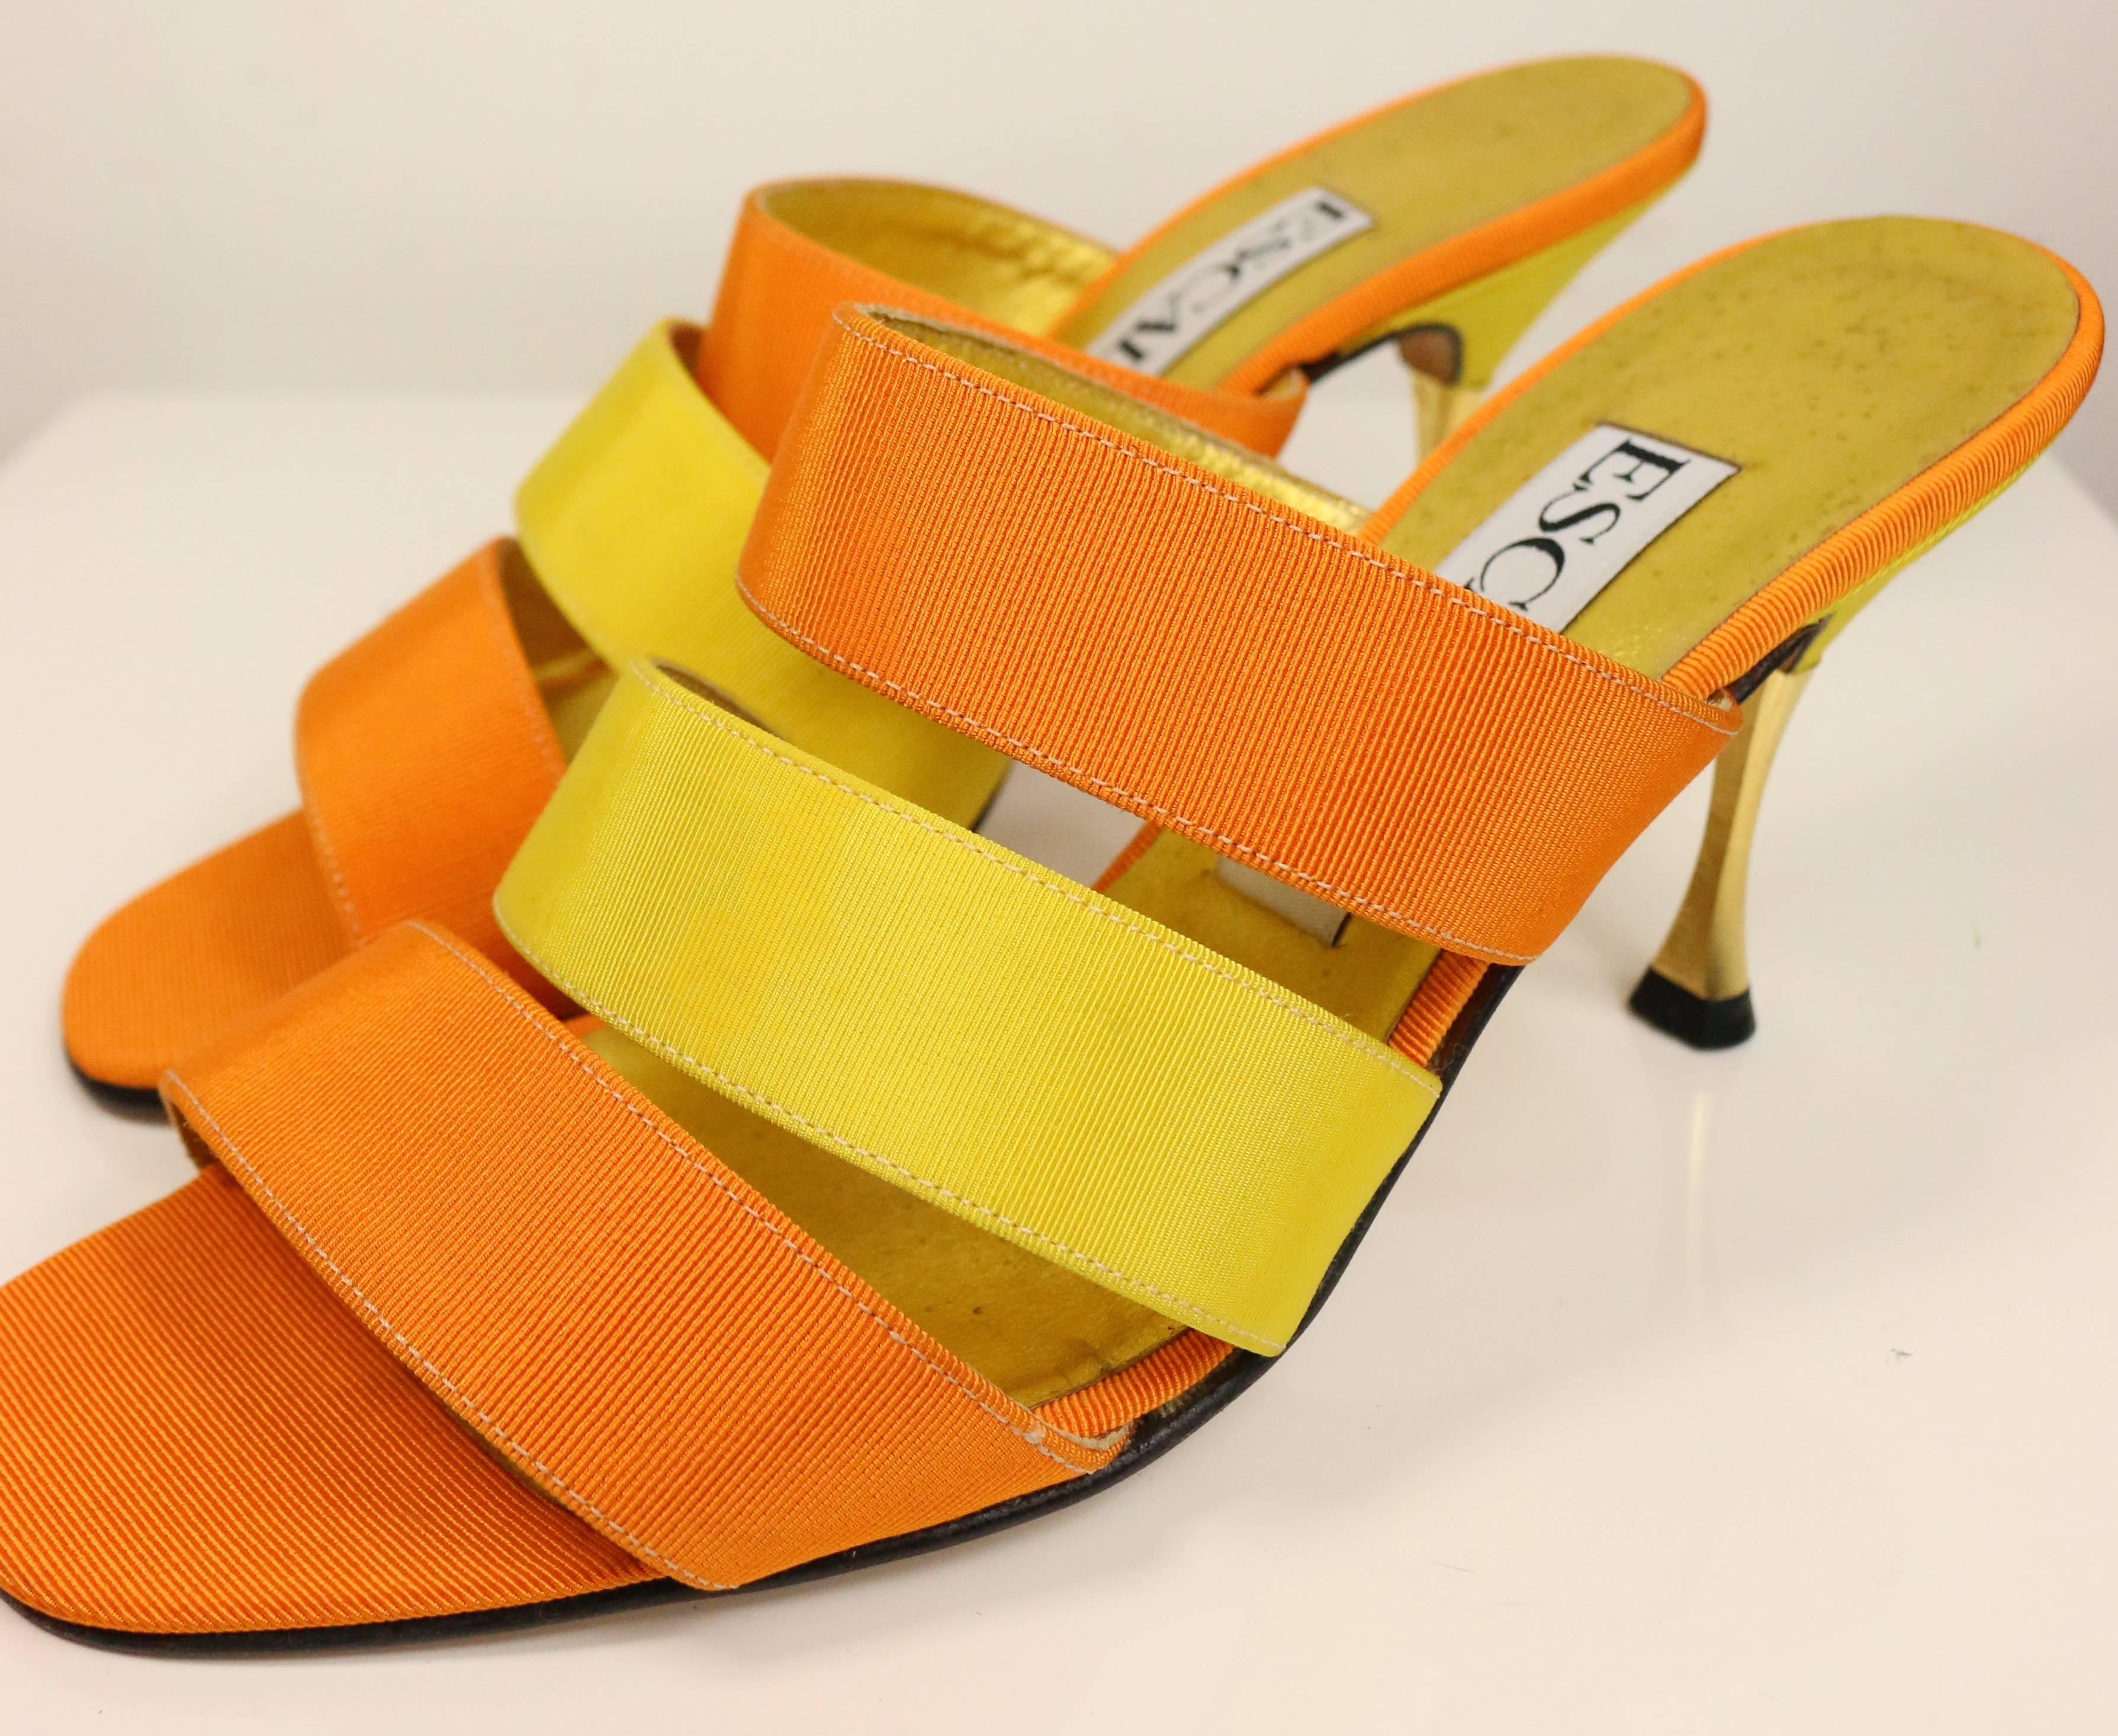 - Vintage 80s Escada bi tones orange and yellow three straps sandals gold tone heels. 

- Size 37.5

- Length: 8.5 in I Height: 3.5in I Heels: 2in 

- Made in Italy. 

- The strap fabric feels like Nylon. 

- Please note this vintage item is not